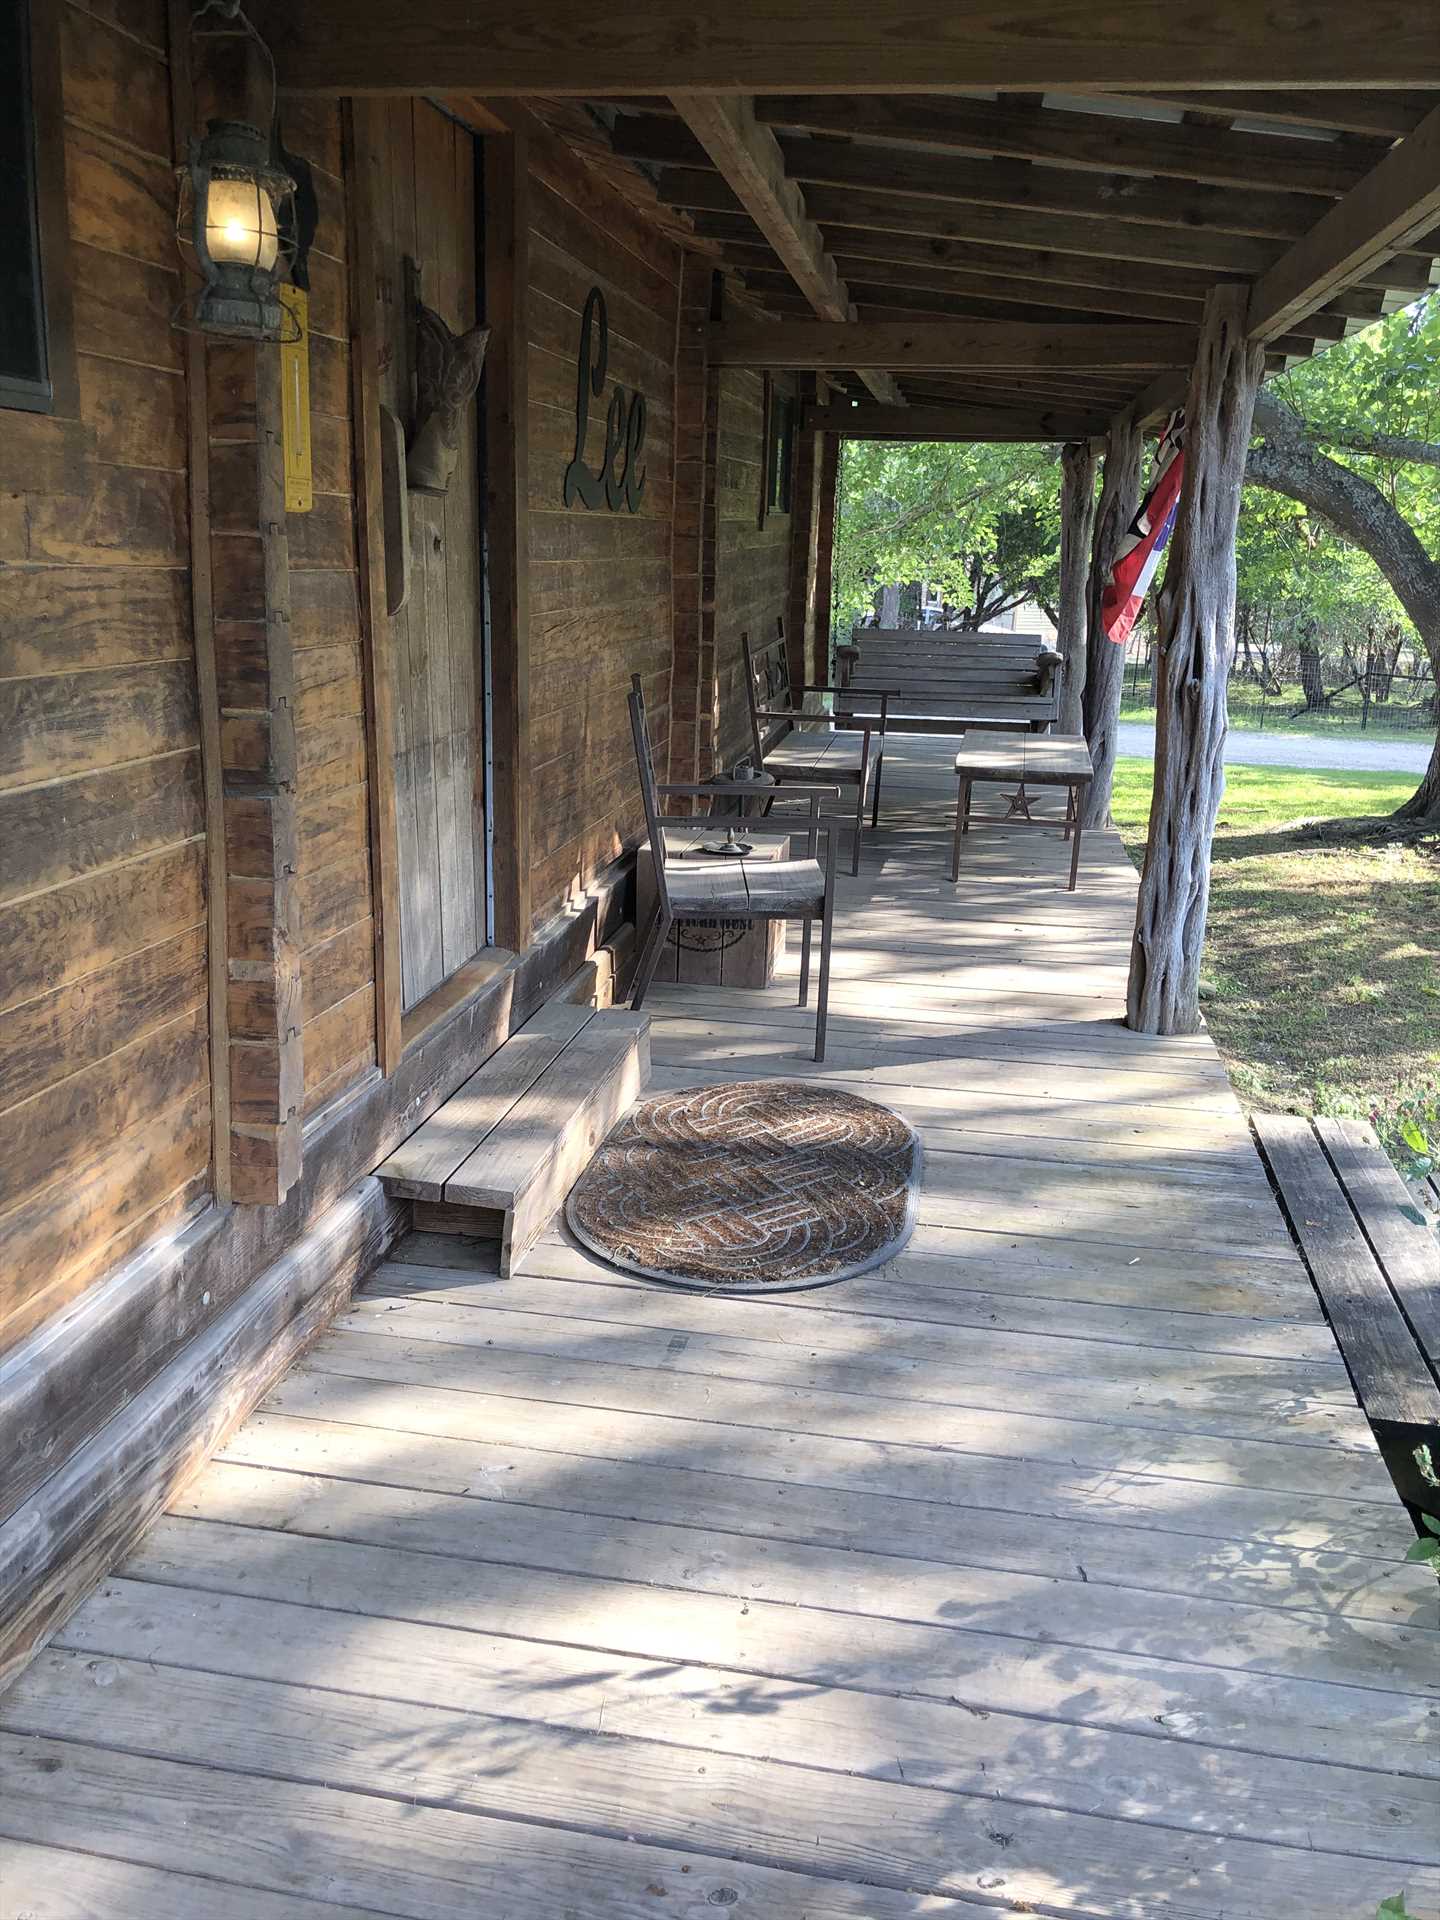                                                 The shady porch is a great place to sit and sip your favorite beverage-and there's a fenced enclosure for the safety of your pets and little ones.